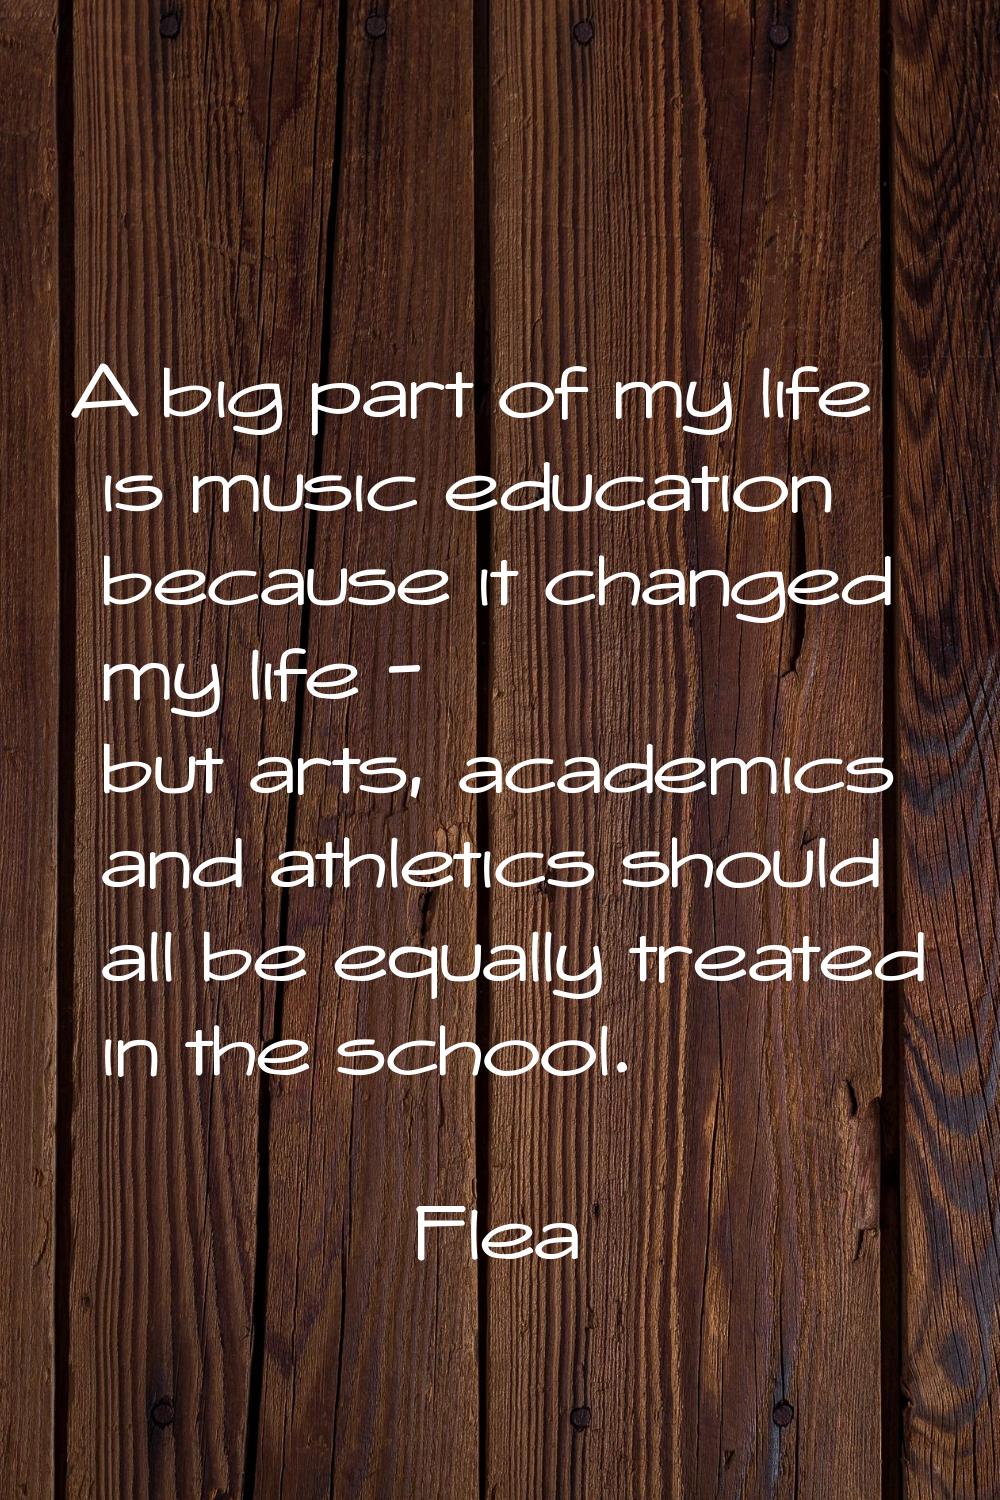 A big part of my life is music education because it changed my life - but arts, academics and athle